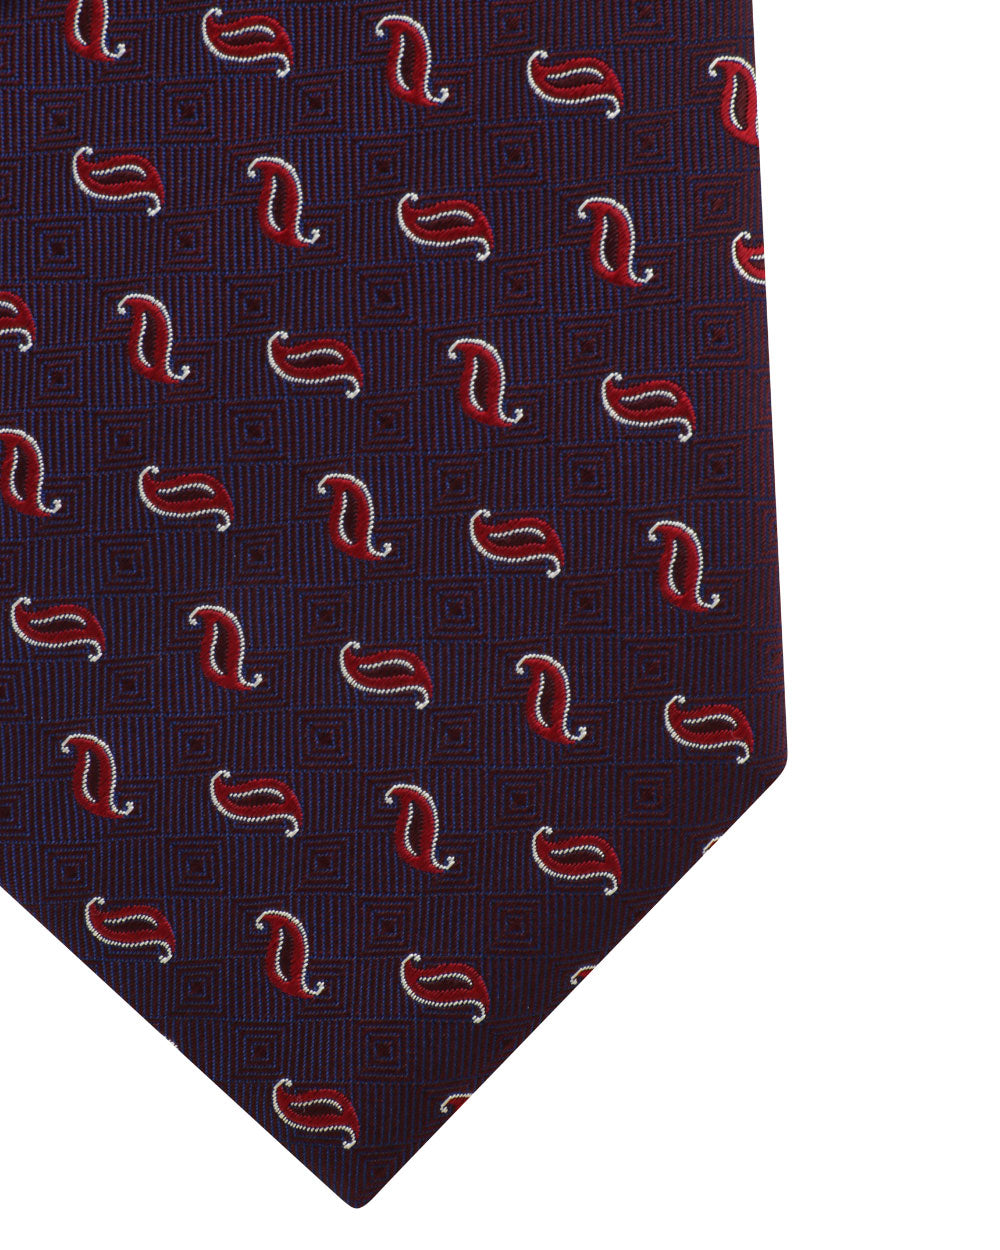 Amaranth and Flame Paisley Motif Tie